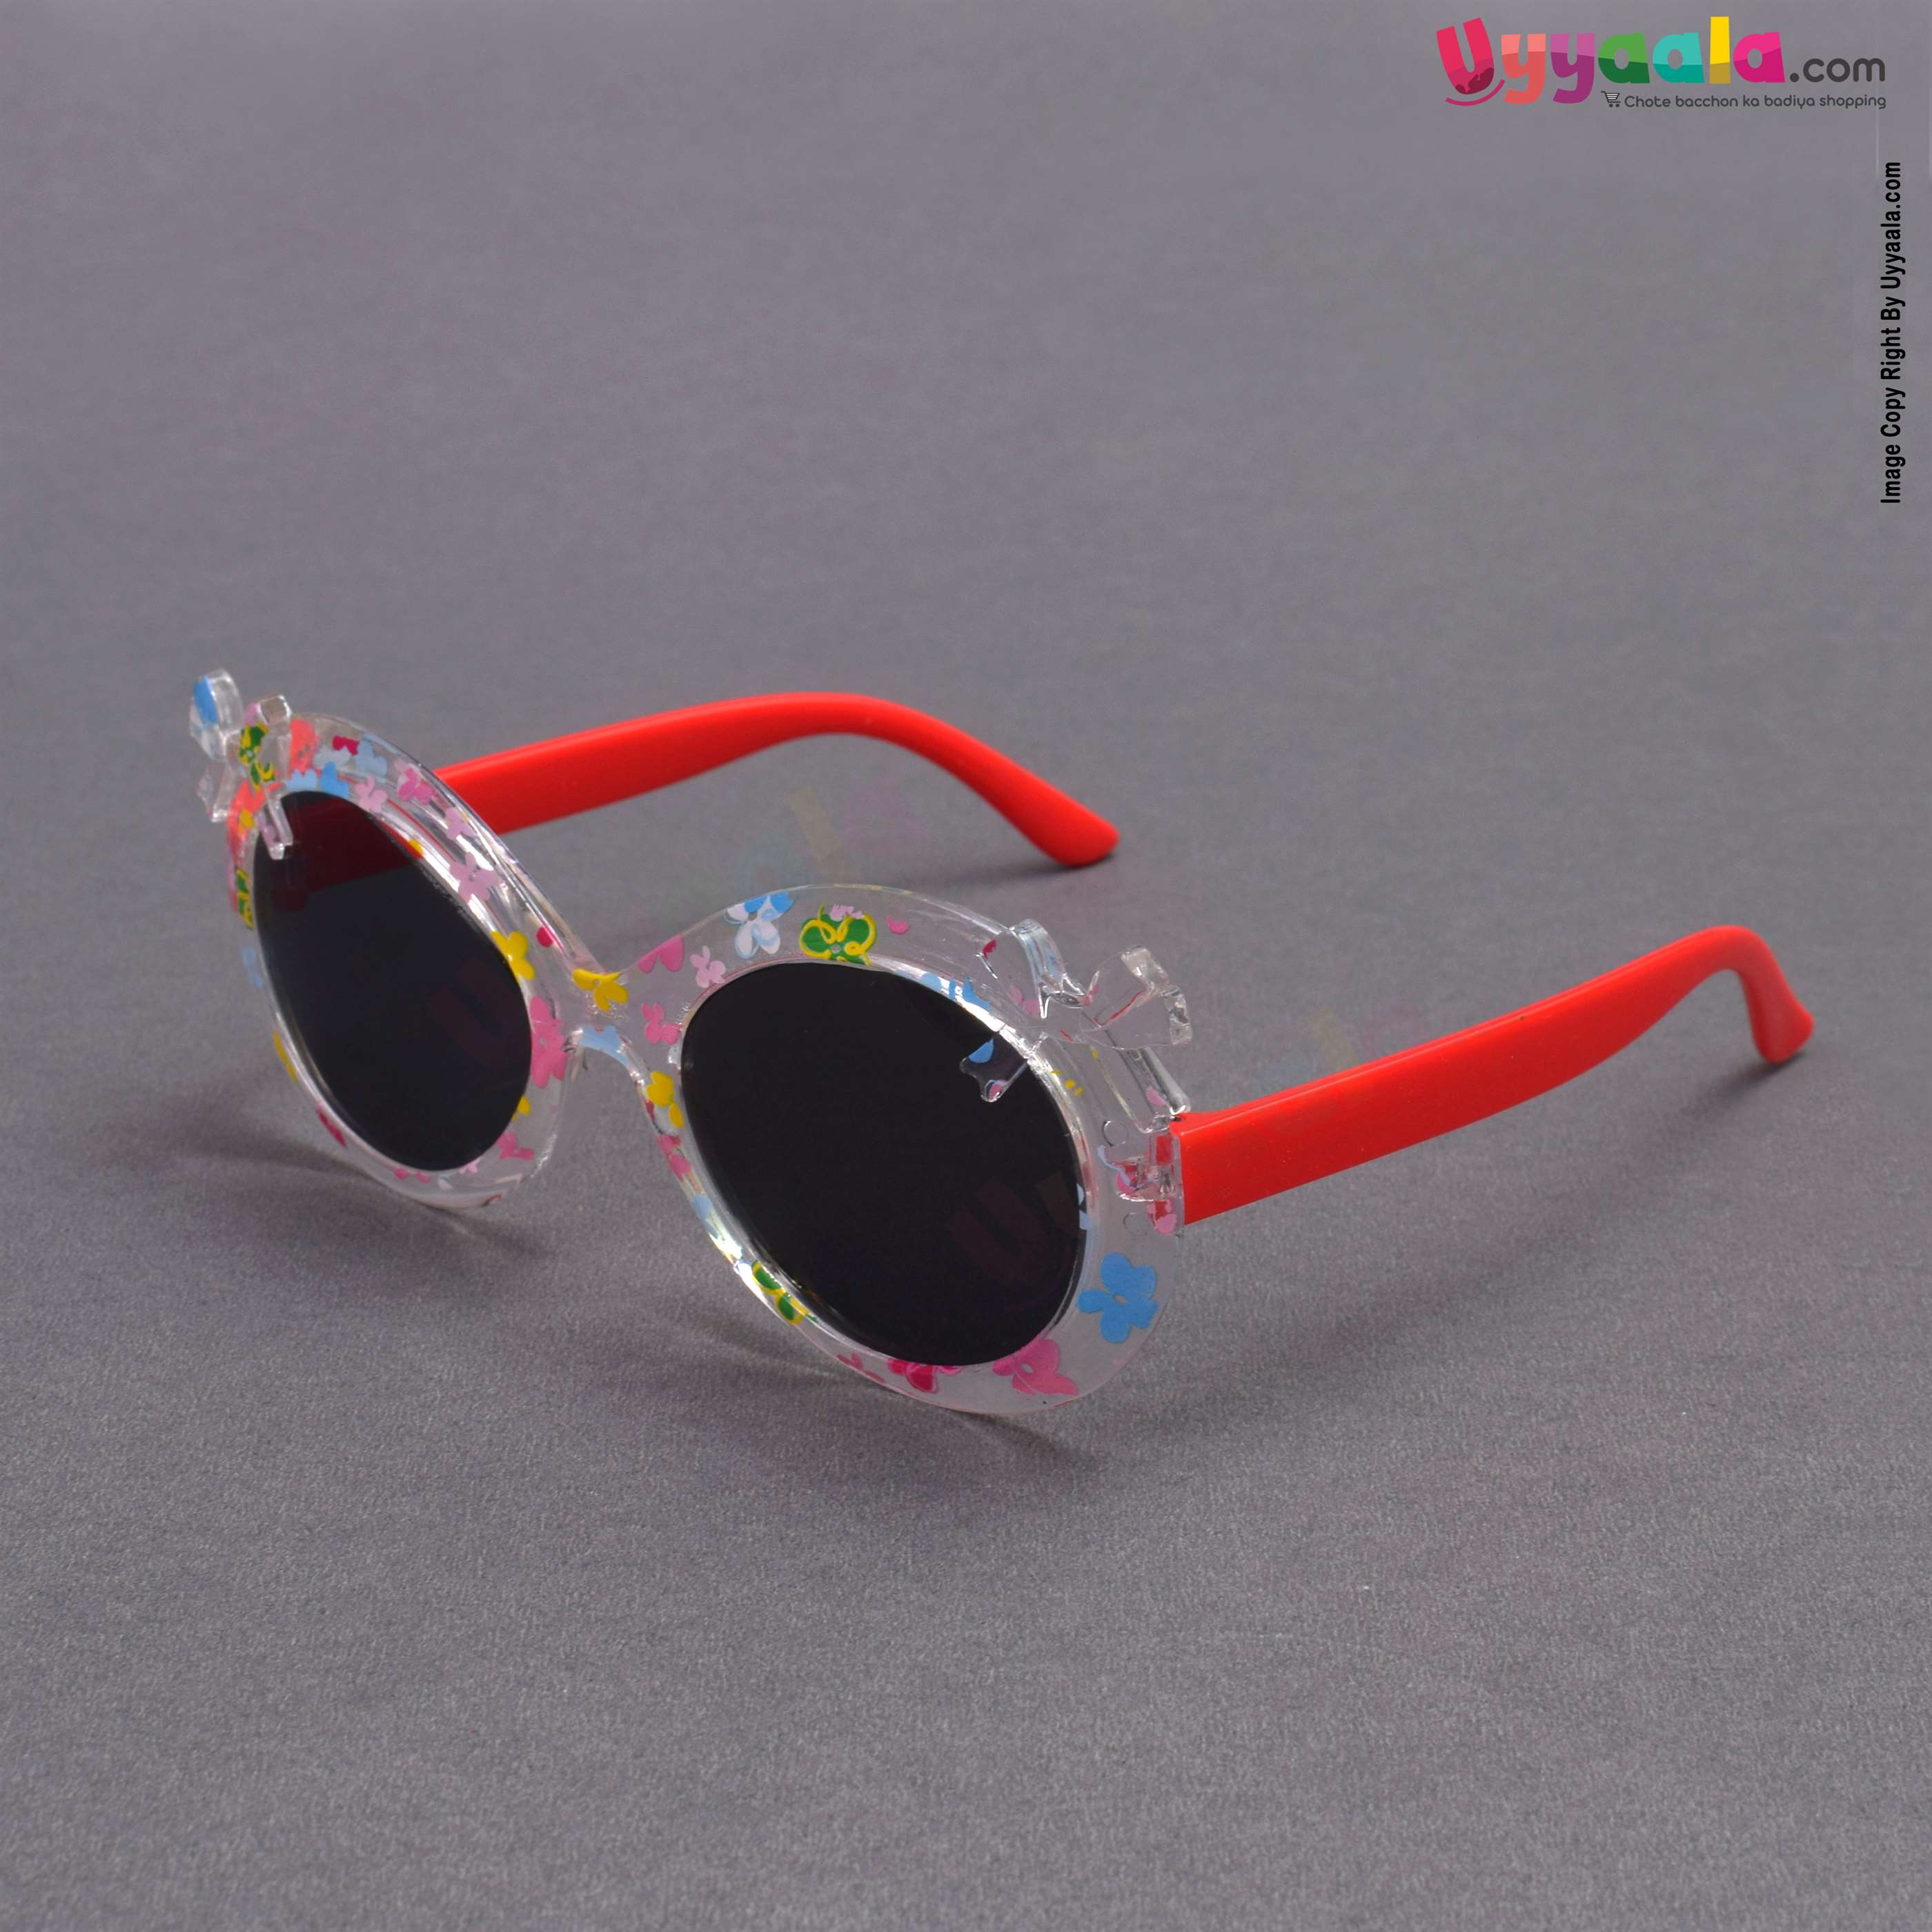 Stylish cat-eye tinted sunglasses for kids - red & floral print